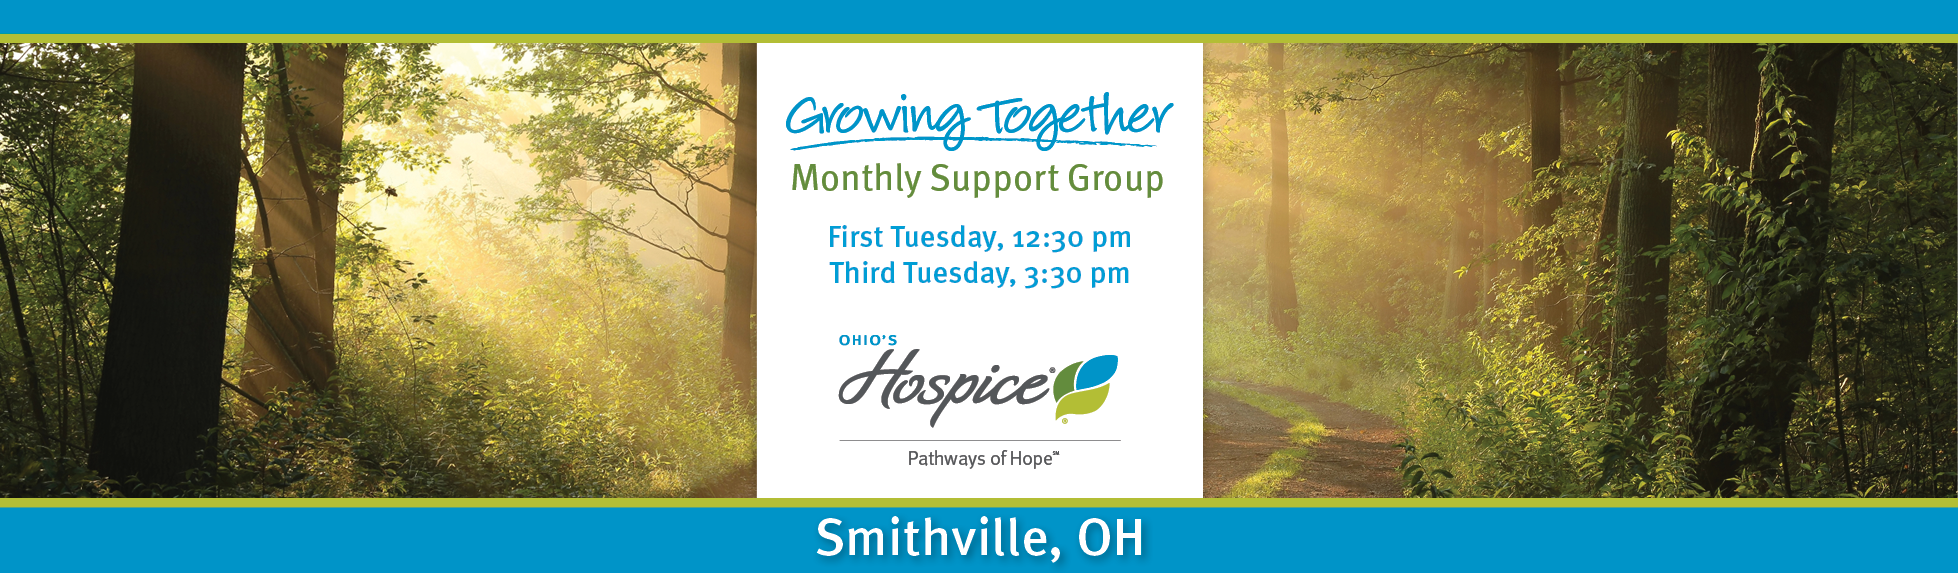 Growing Together Monthly Support Group Smithville, Ohio